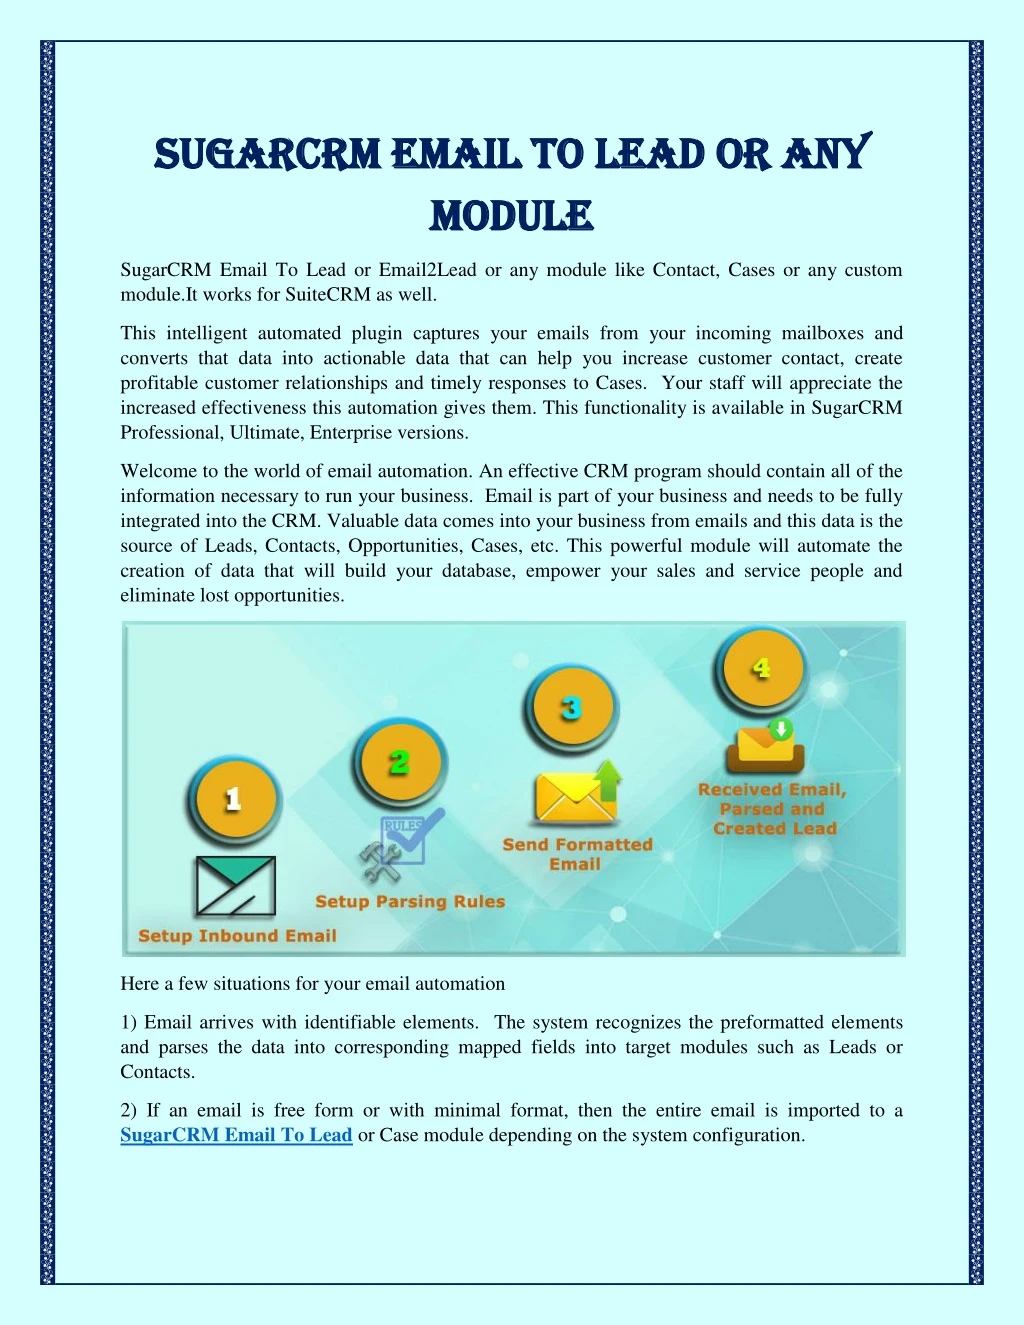 sugarcrm email to lead or any sugarcrm email